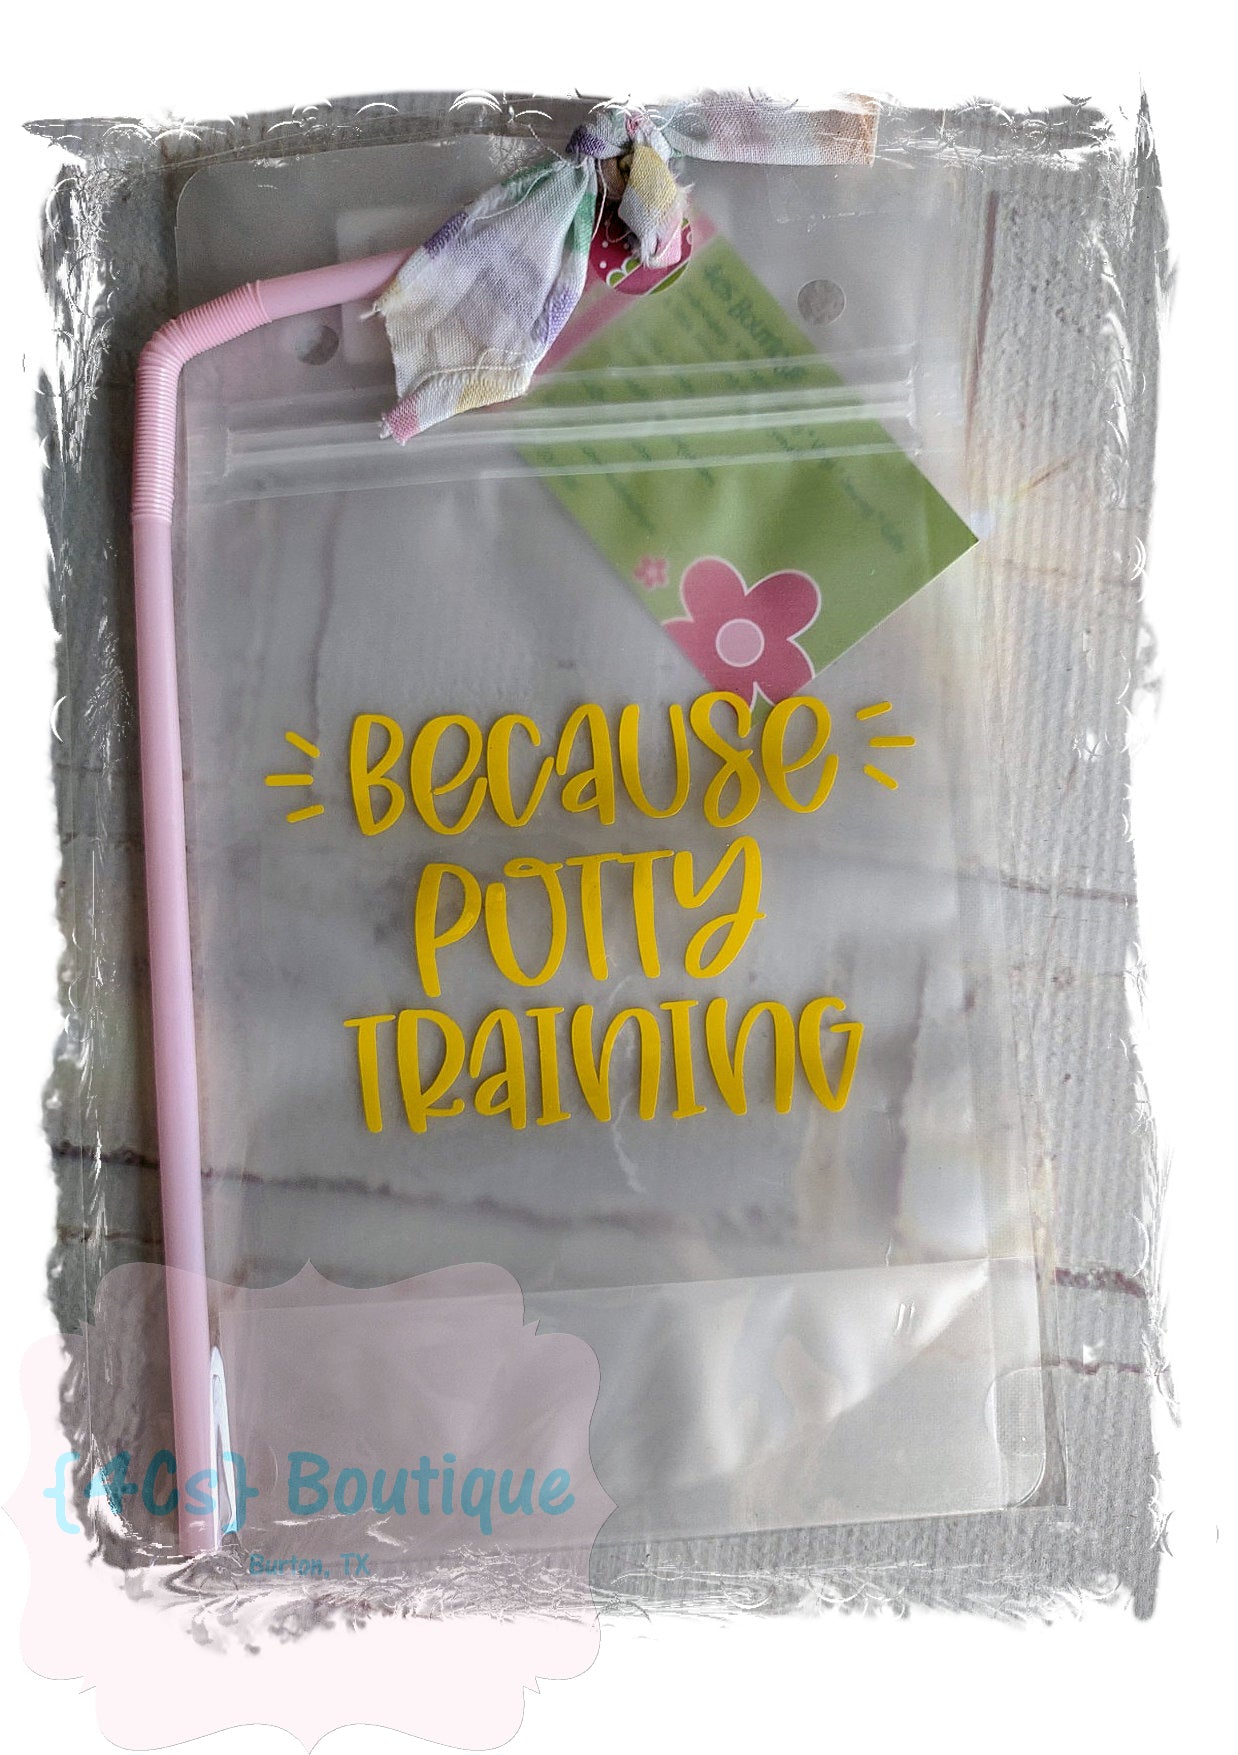 Because Potty Training (Yellow) Adult Drink Pouch